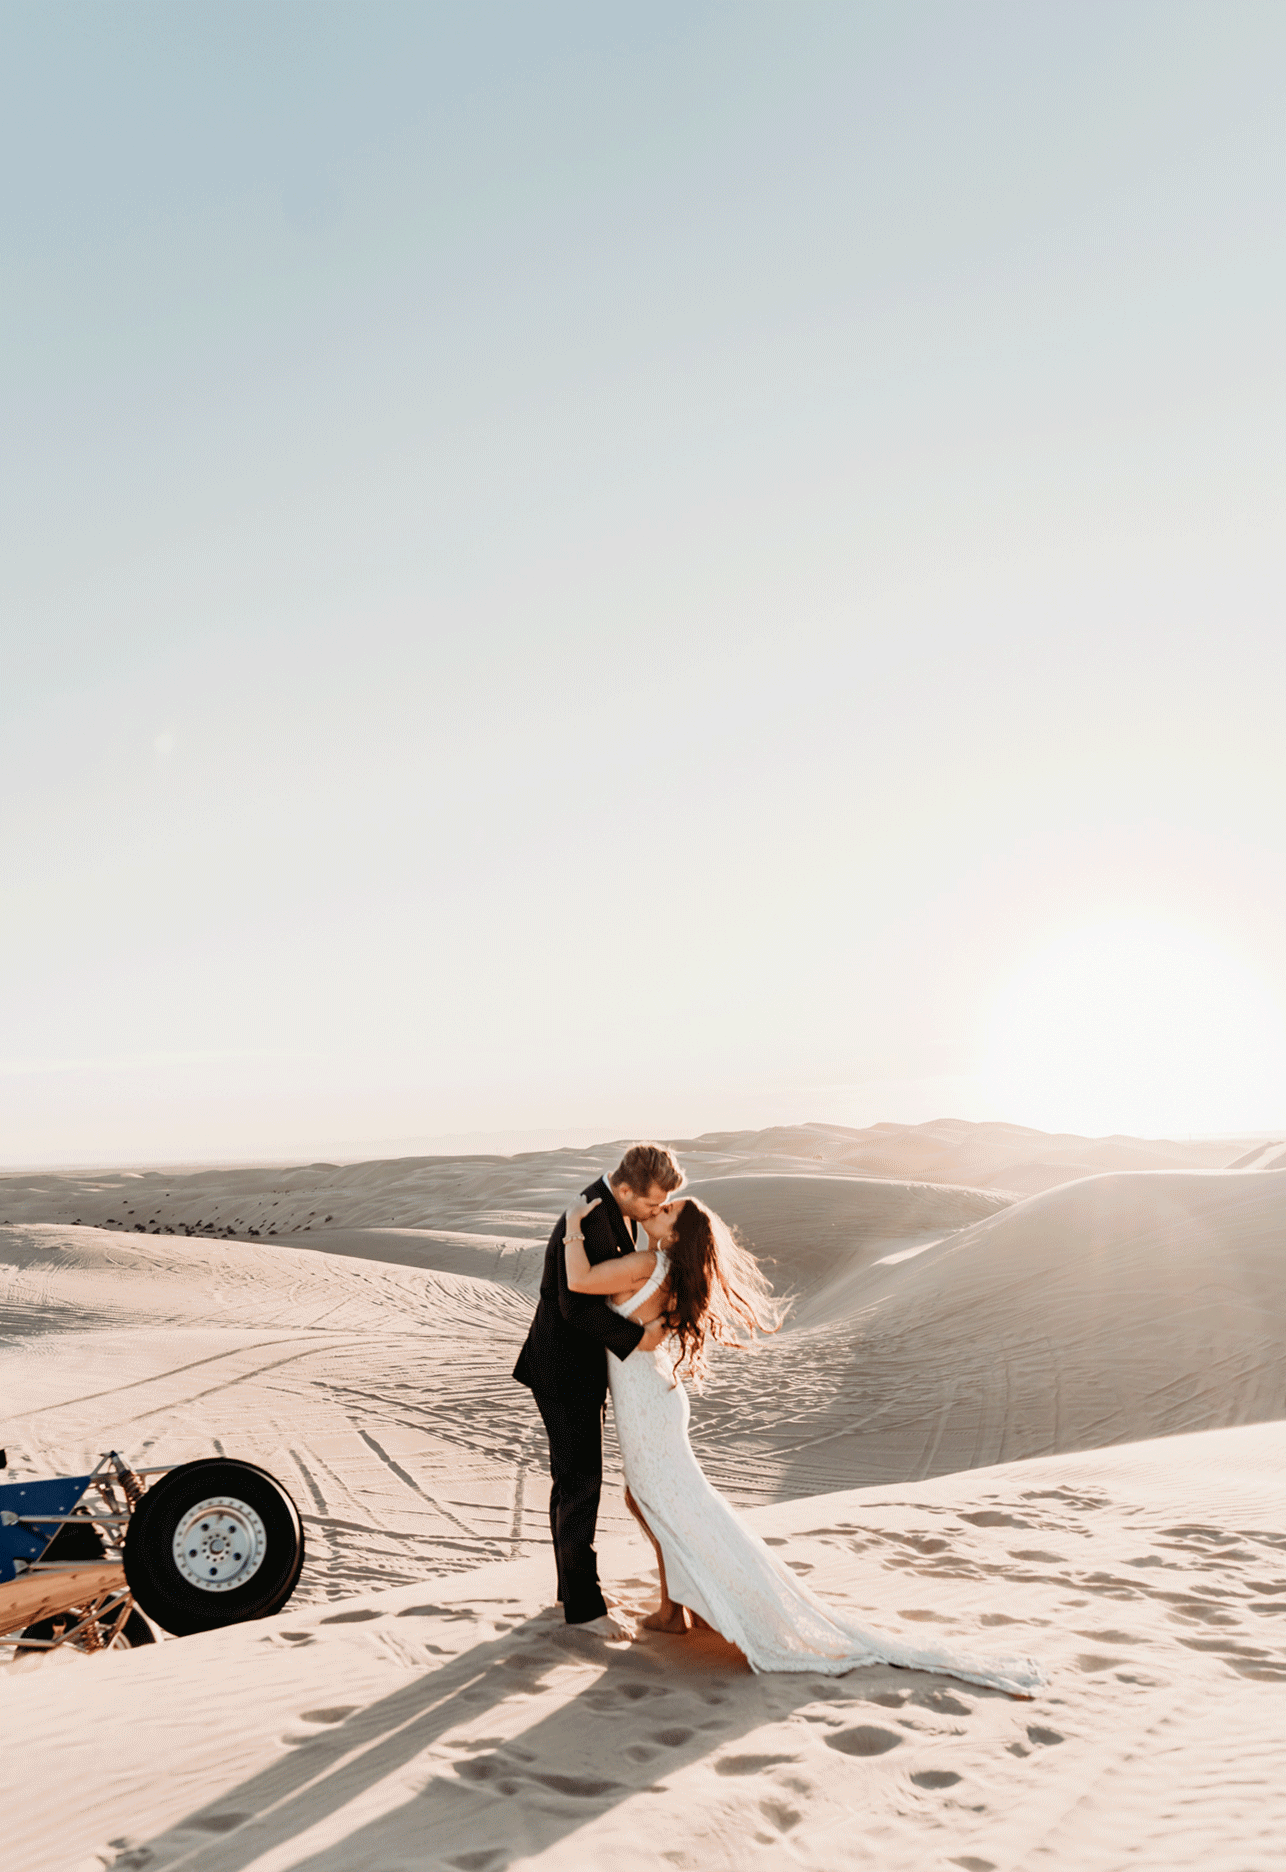 Bride and groom kiss as the sun goes down at Imperial Sand Dunes in Arizona after their wedding. A side by side flies behind them kicking up sand for a dramatic, smokey like effect